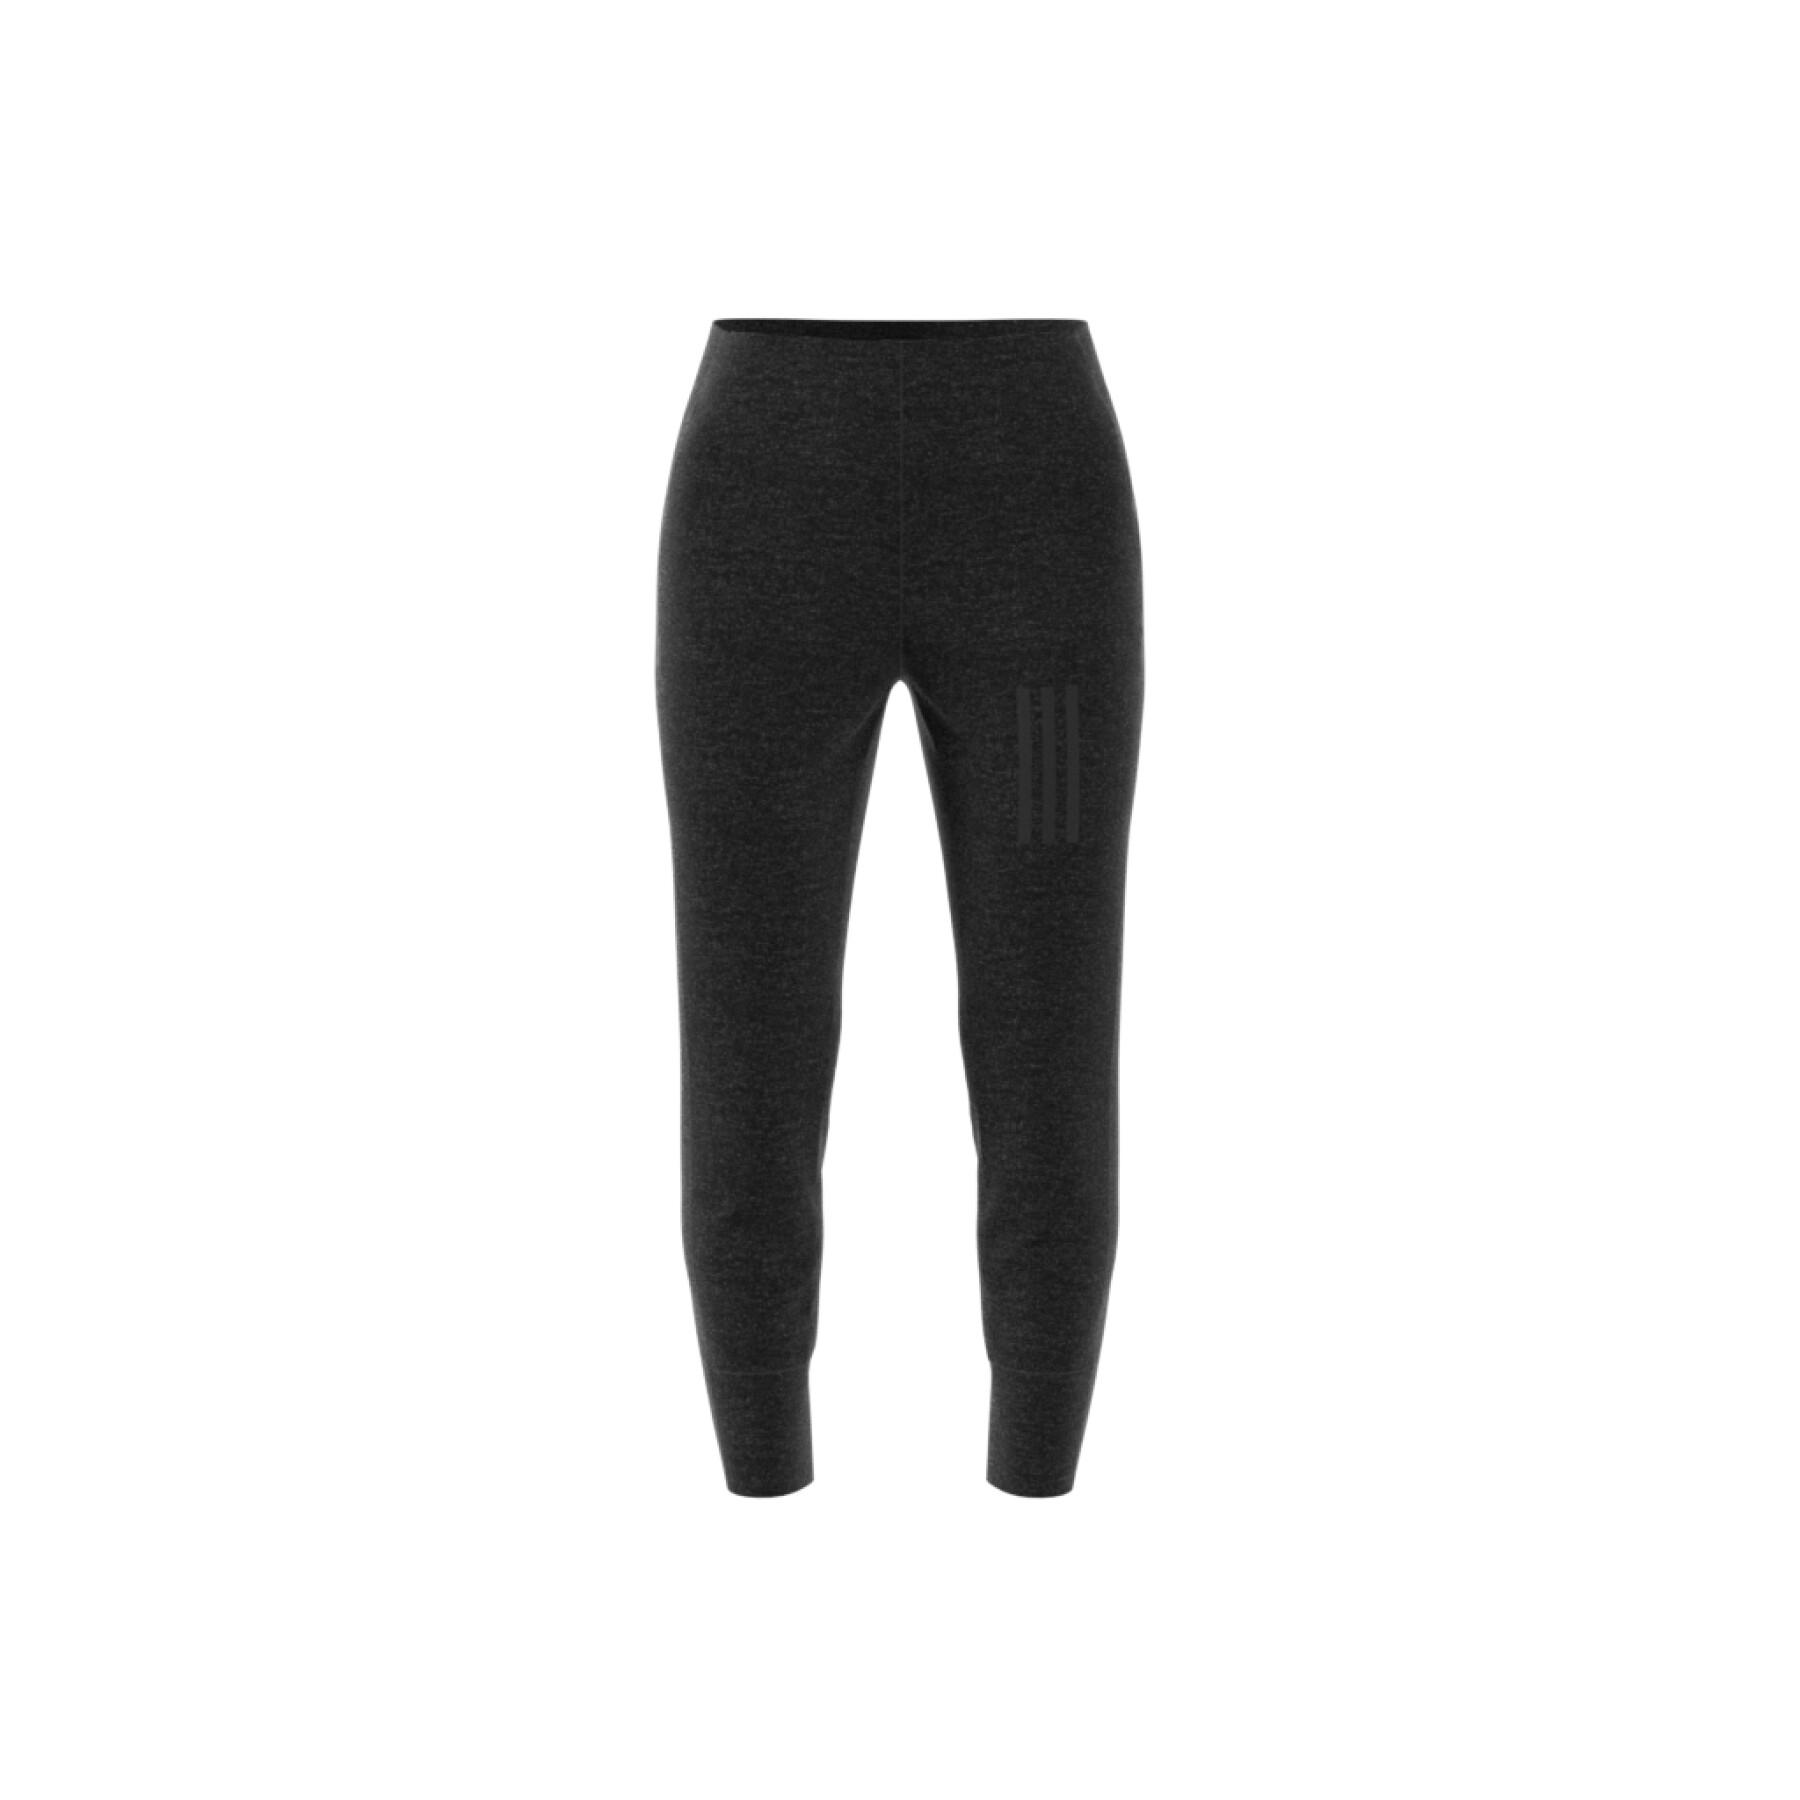 Women's high-waisted slim-fit jogging suit adidas Mission Victory